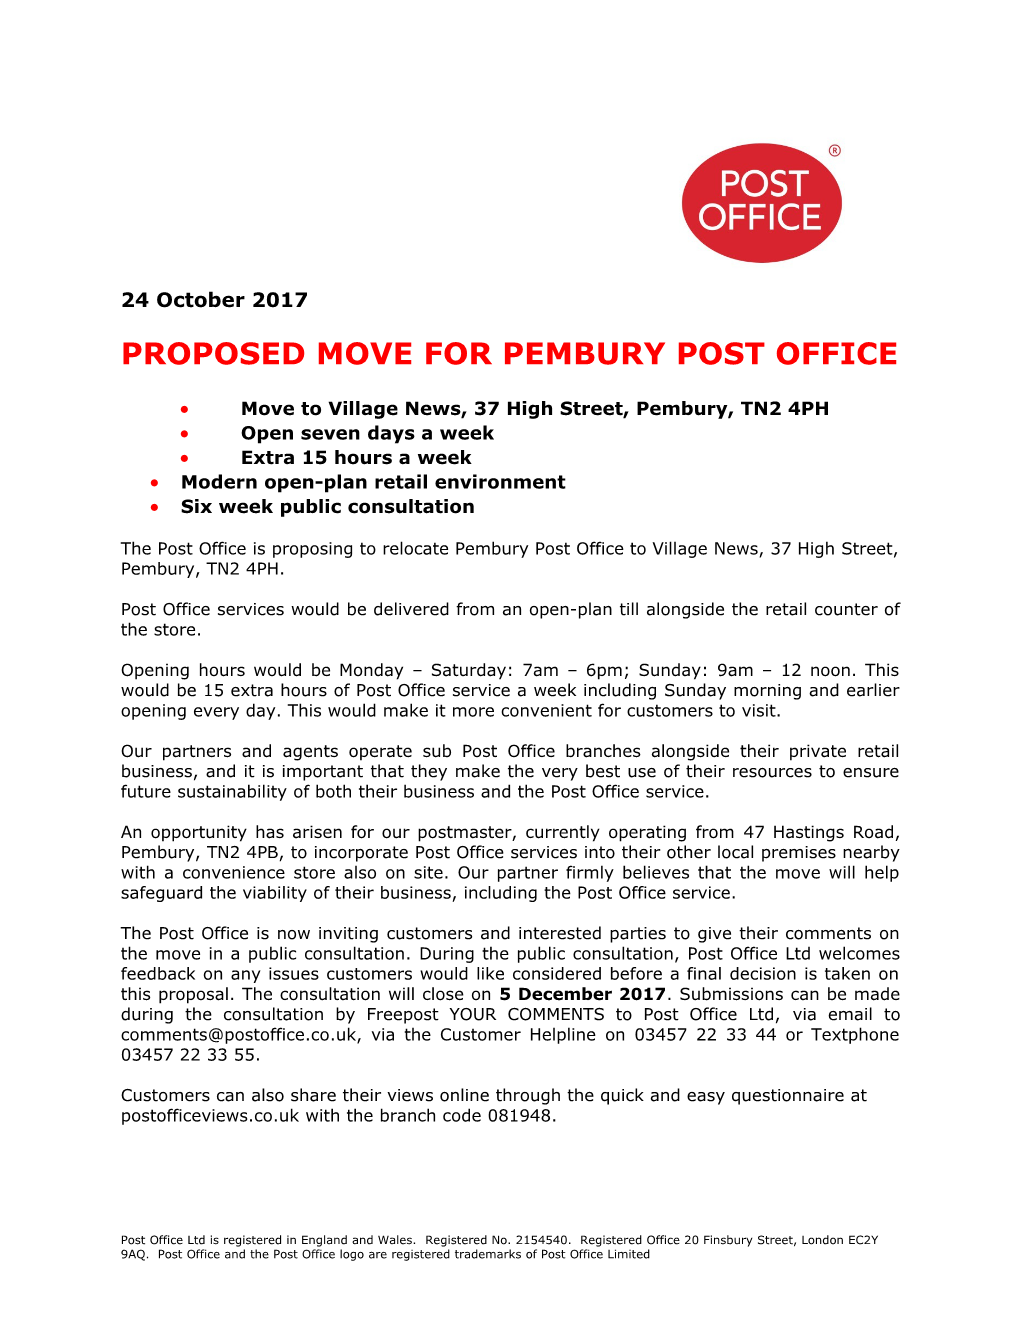 Proposed Move for Pembury Post Office